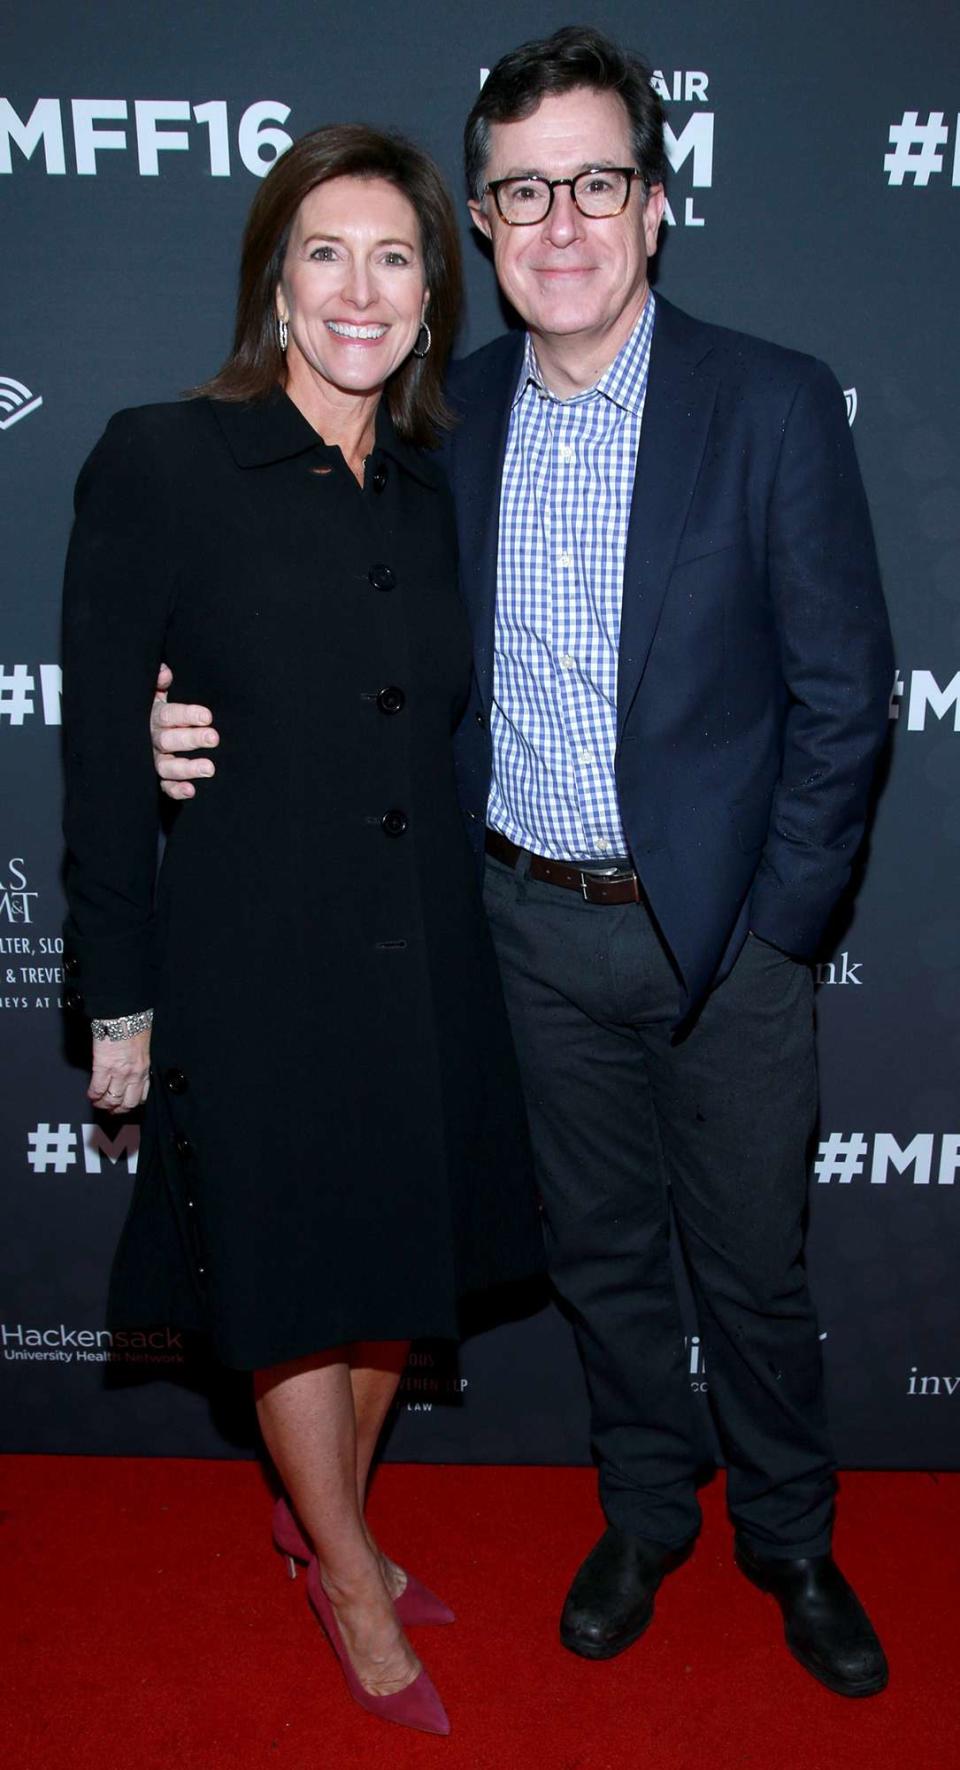 Evelyn Colbert, Vice-Chairman of the Board MFF (L) and Stephen Colbert attend the Montclair Film Festival 2016 Opening Night "Life Animated" on April 30, 2016 in Montclair City